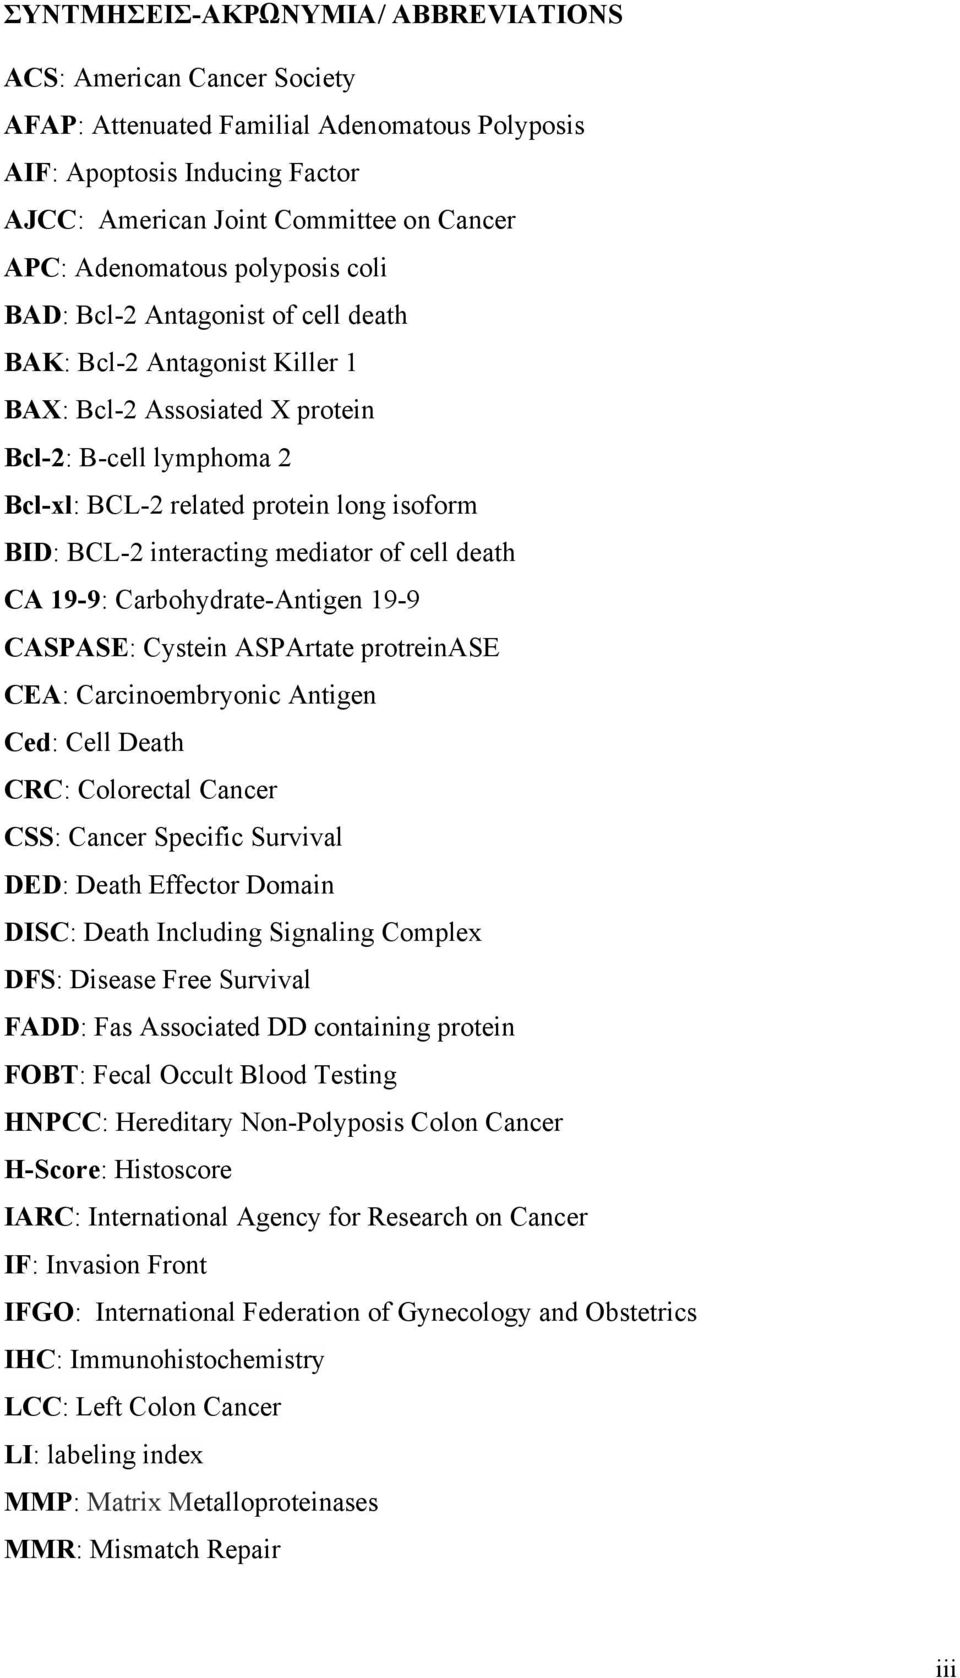 BCL-2 interacting mediator of cell death CA 19-9: Carbohydrate-Antigen 19-9 CASPASE: Cystein ASPArtate protreinase CEA: Carcinoembryonic Antigen Ced: Cell Death CRC: Colorectal Cancer CSS: Cancer